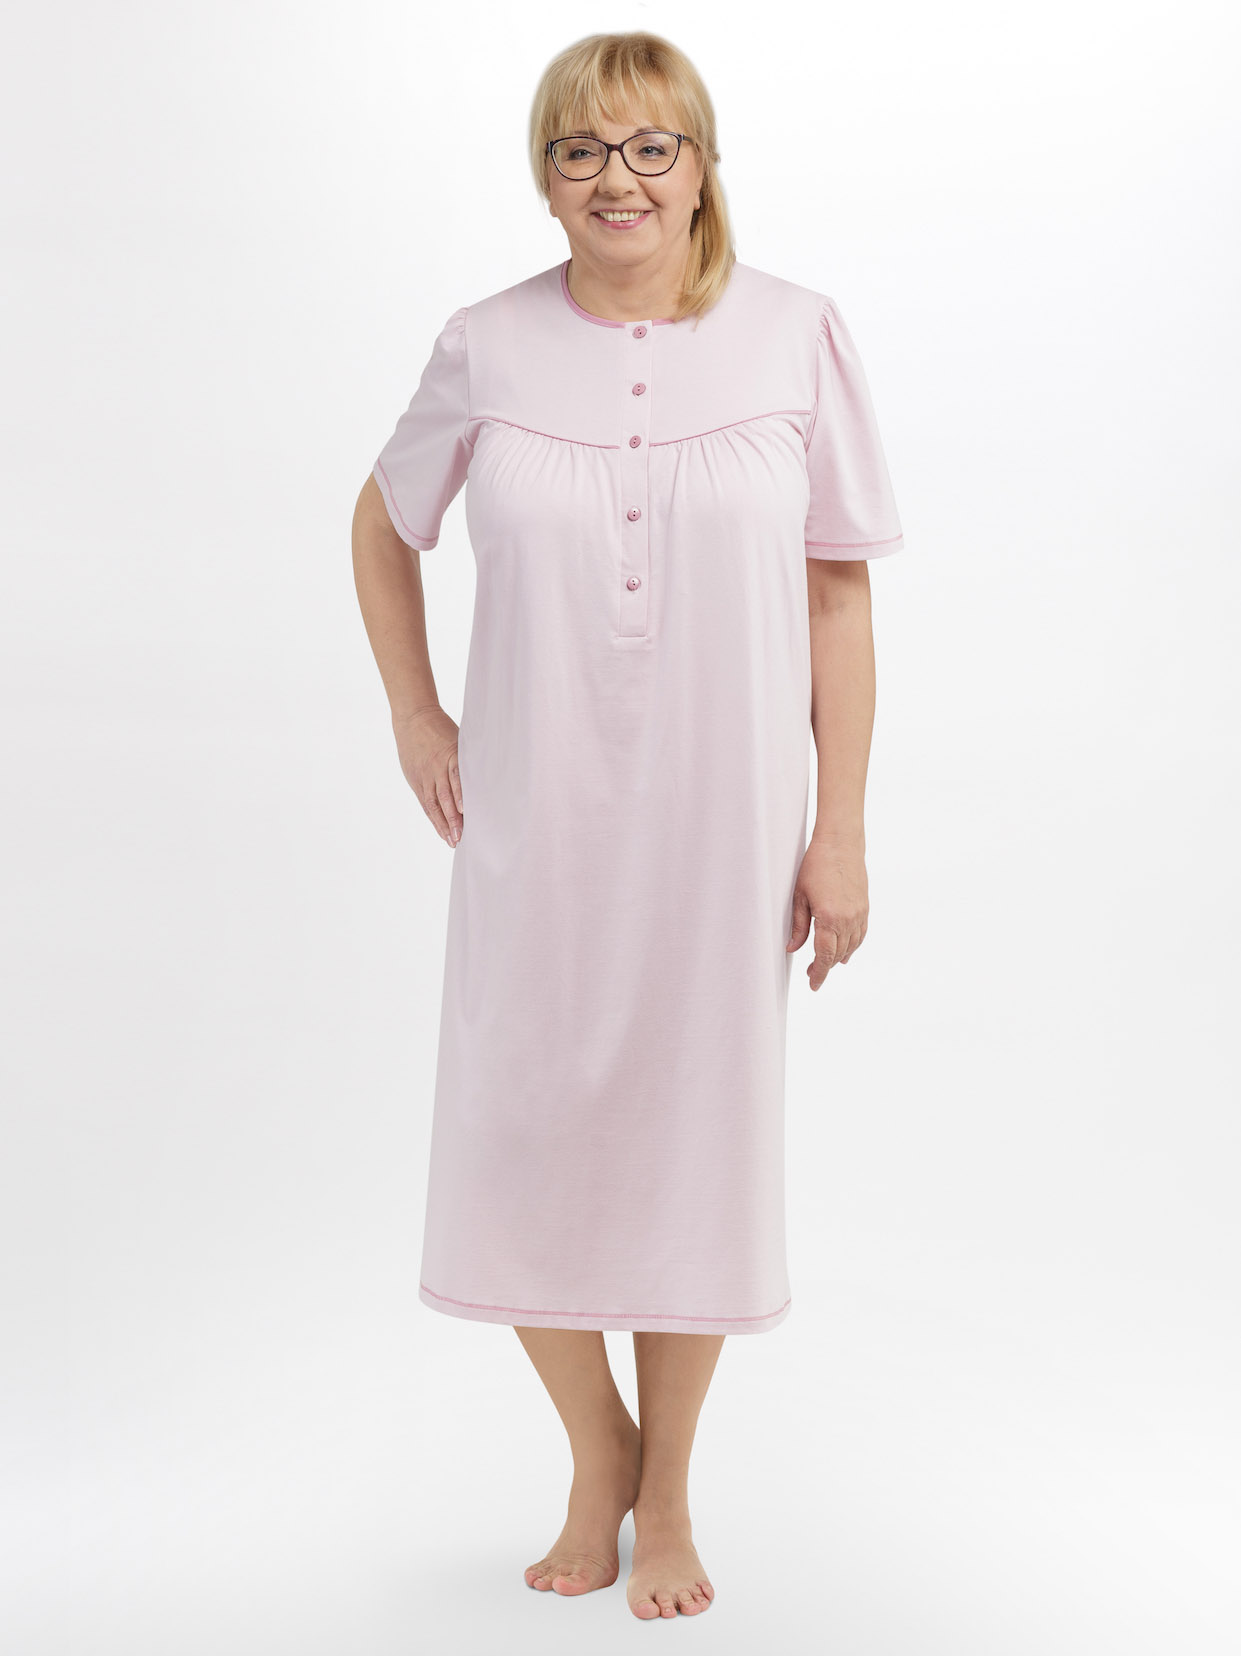 Women's nightgown with buttons on the neckline Martel 221